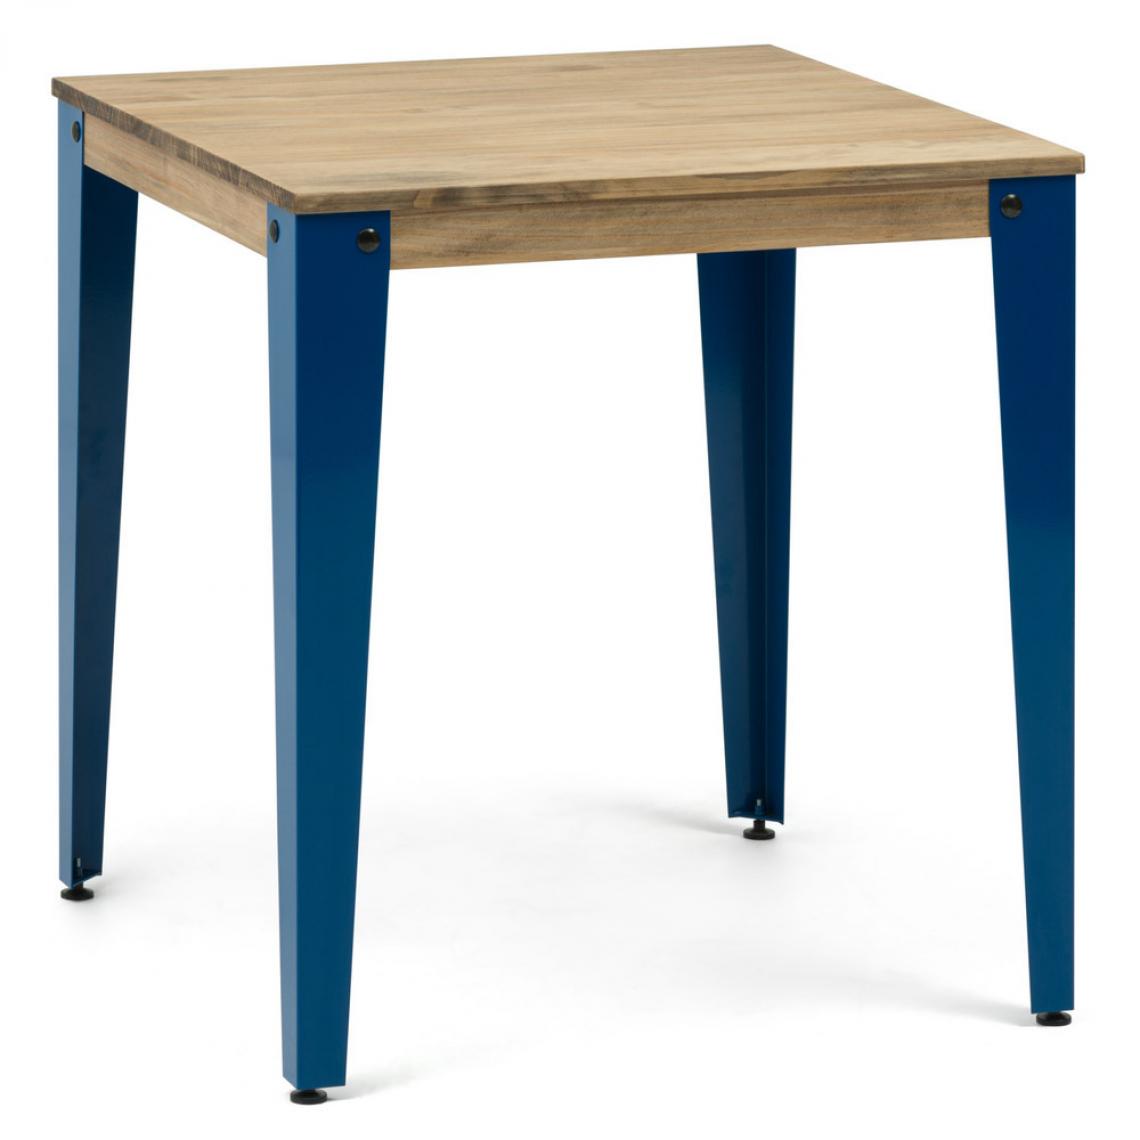 BOX FURNITURE - Table Salle a Manger Lunds 80x80x75cm Bleu-Vieilli Box Furniture - Tables à manger